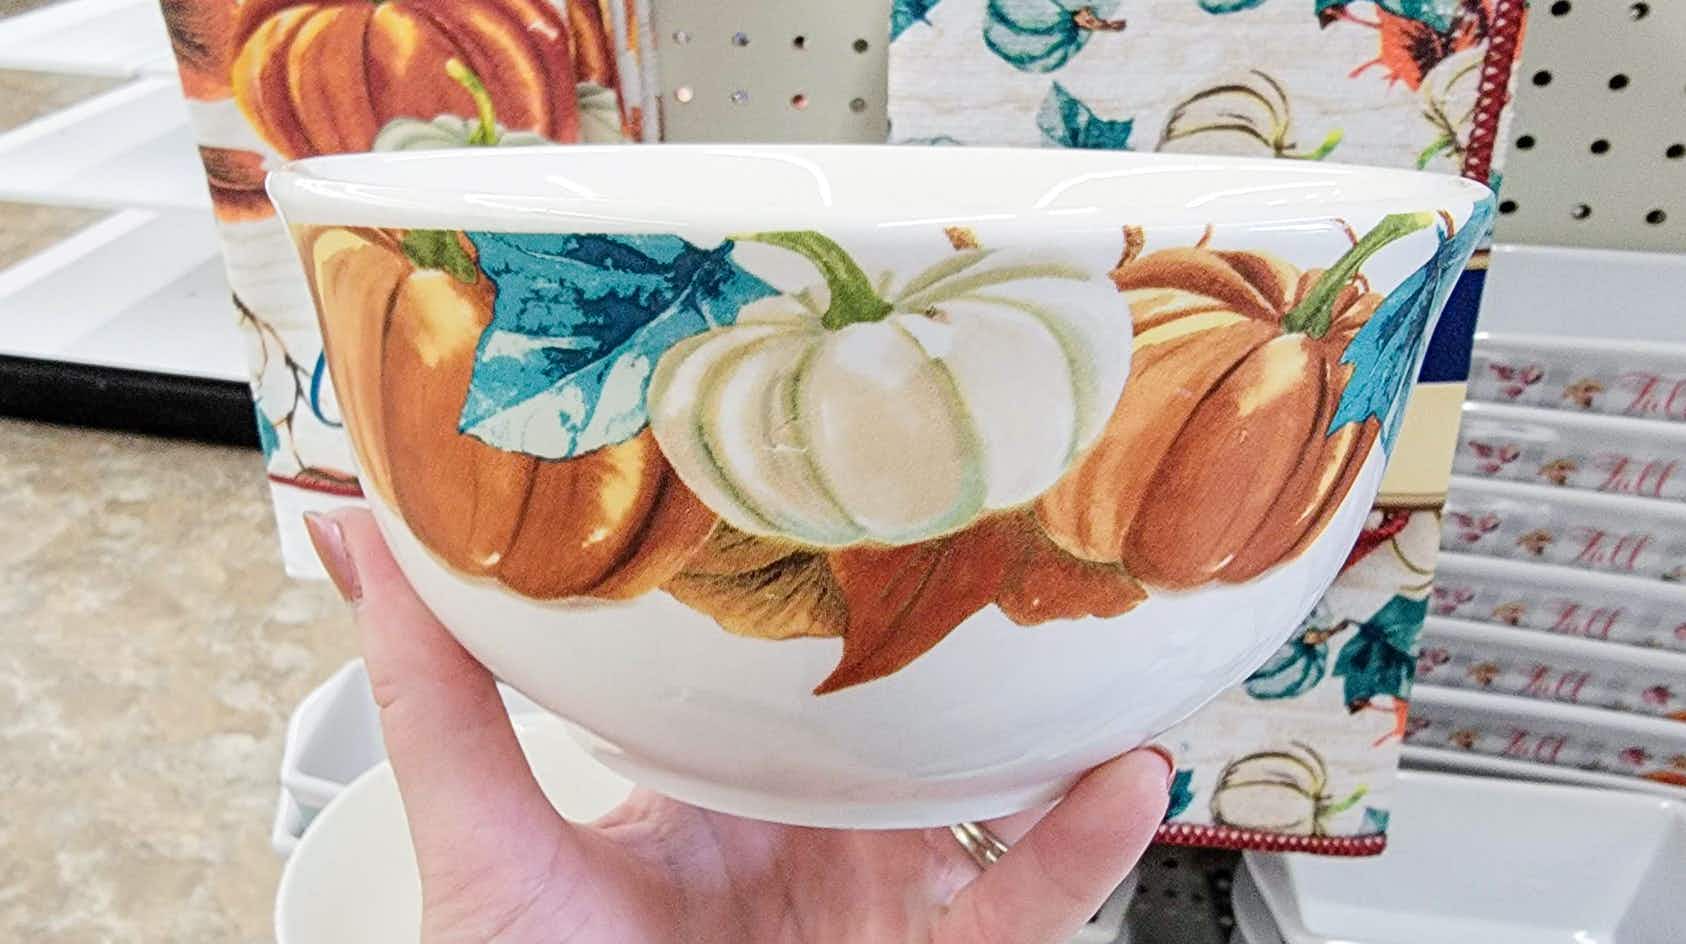 hand holding a bowl with pumpkins on it